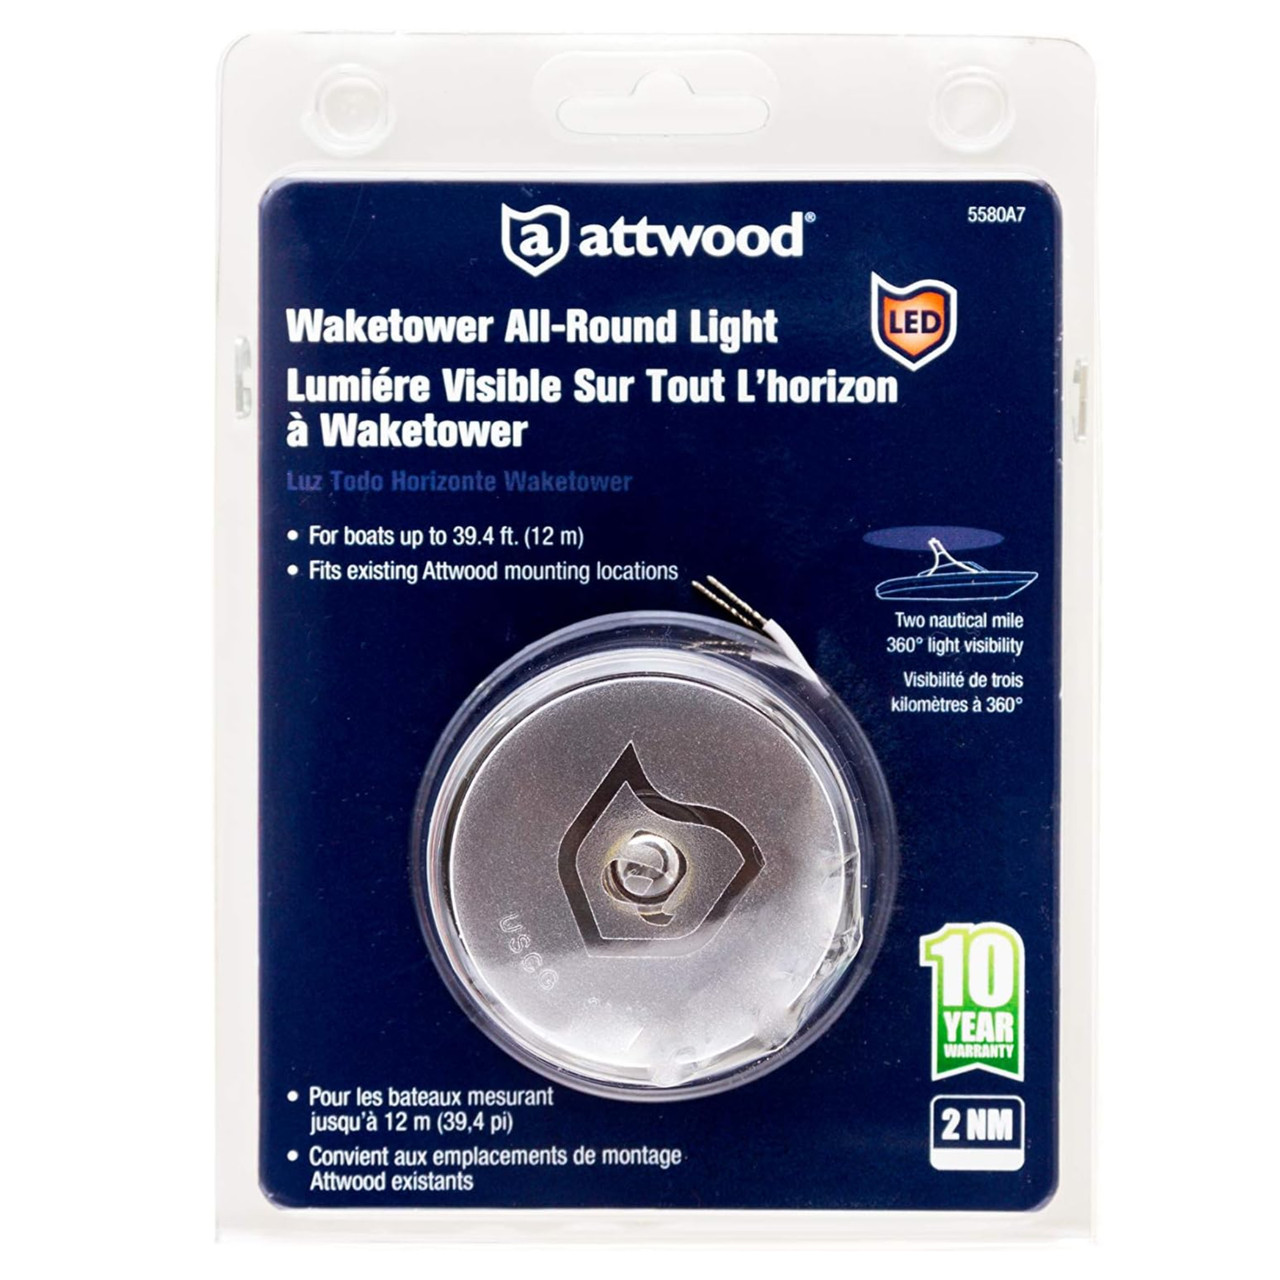 Attwood Marine New Wake Tower All-Round LED Light, 23-5580A7